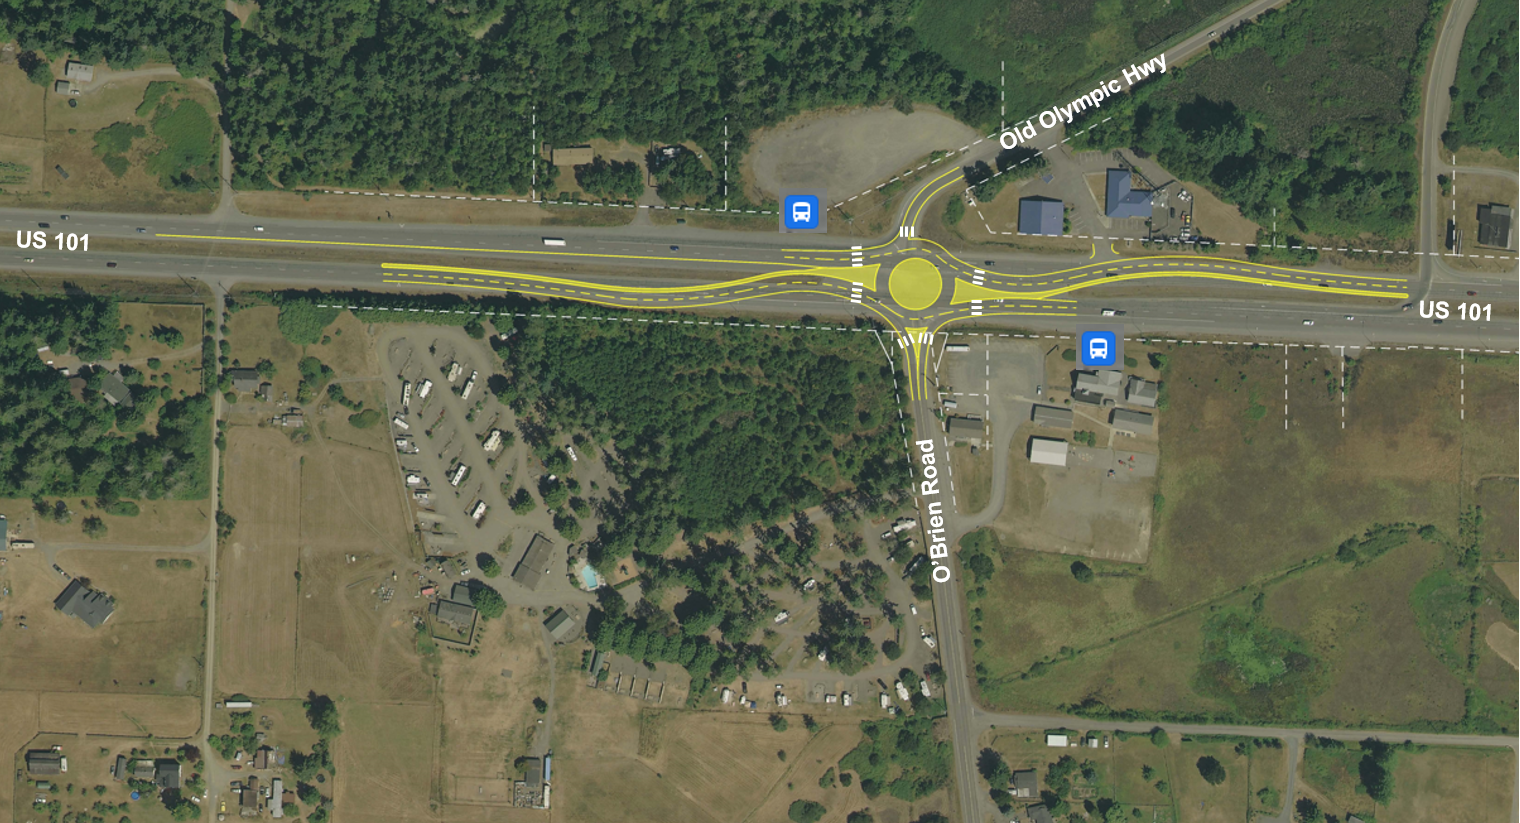 An aerial map with a two-lane roundabout drawn in at the intersection of US 101 and Old Olympic Highway/O'Brien Road near Port Angeles.